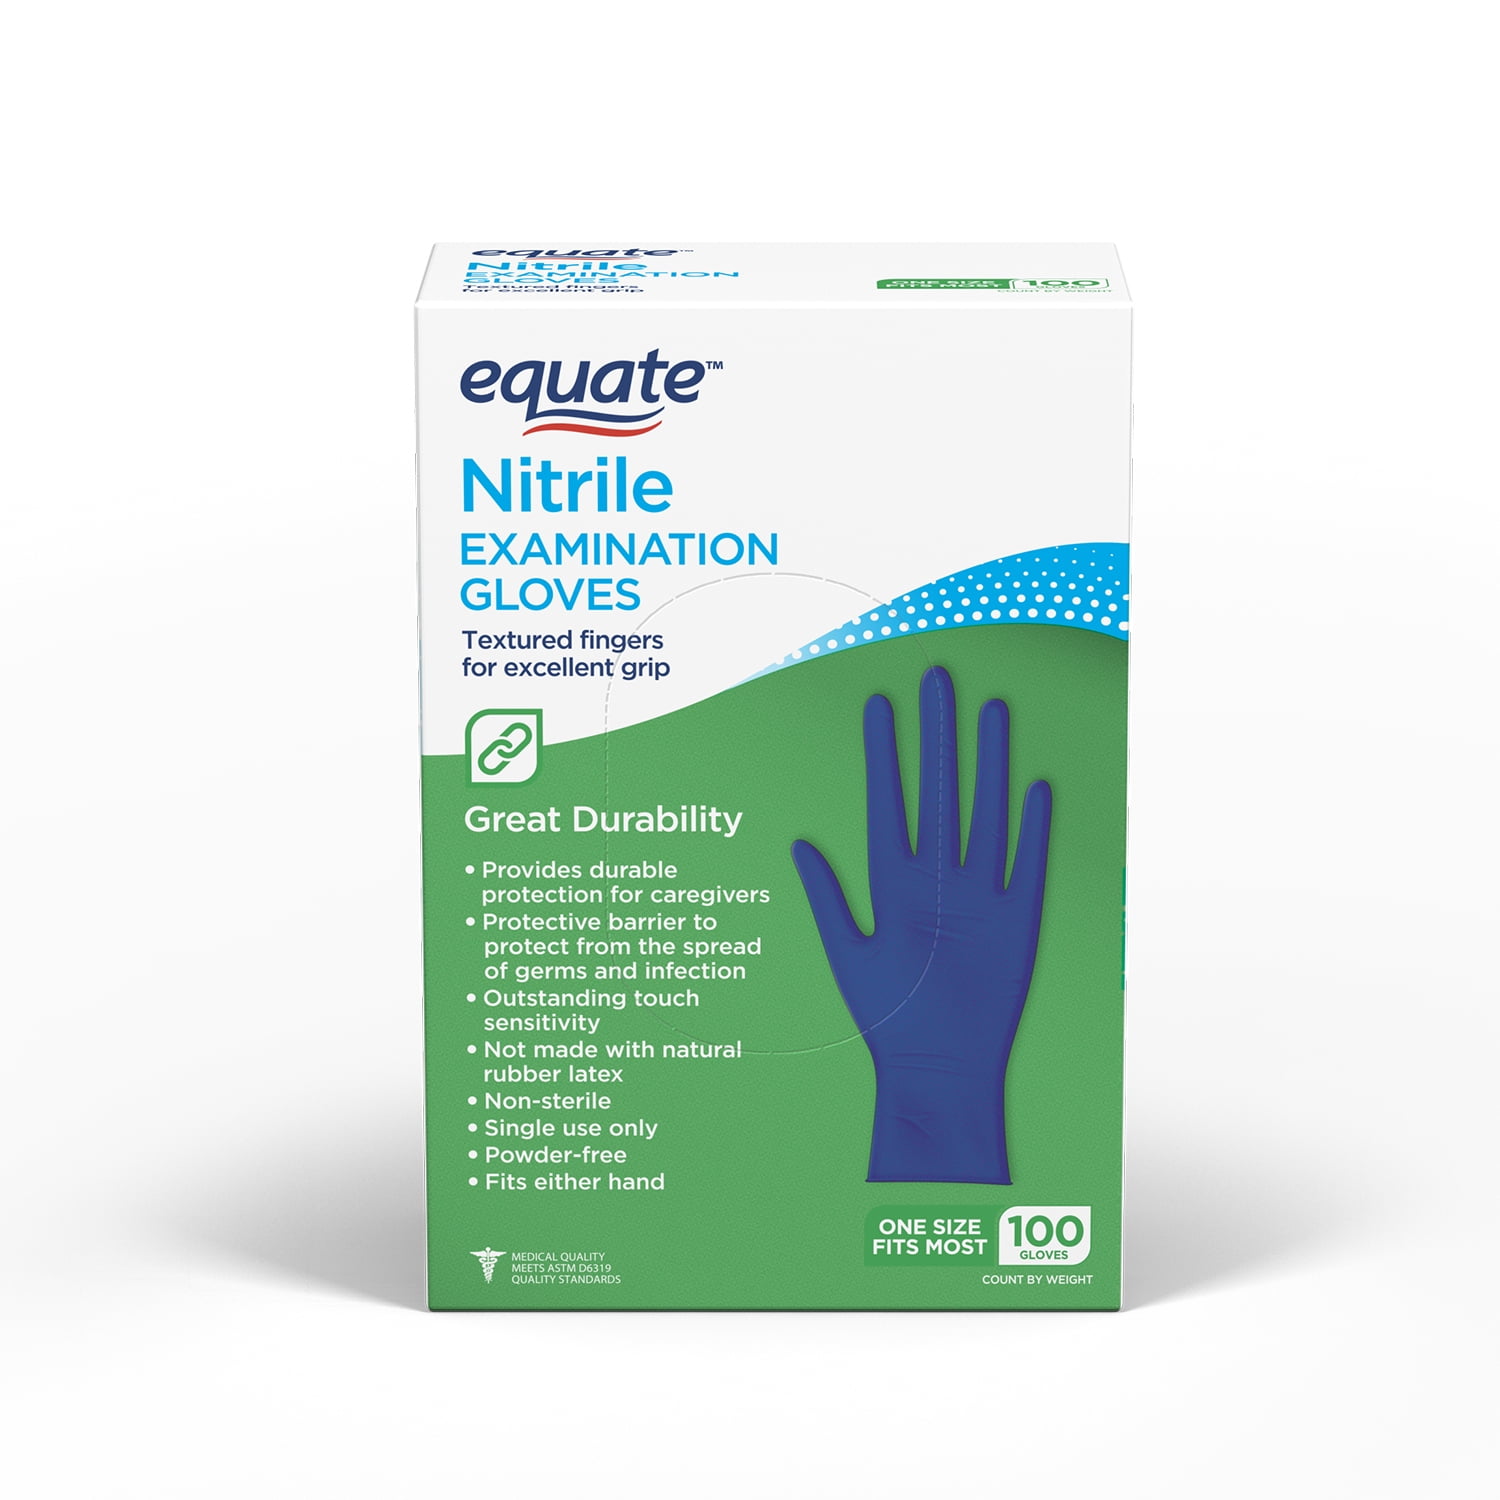 EQUATE NITRILE EXAM GLOVES, ONE SIZE FITS MOST, 100 COUNT